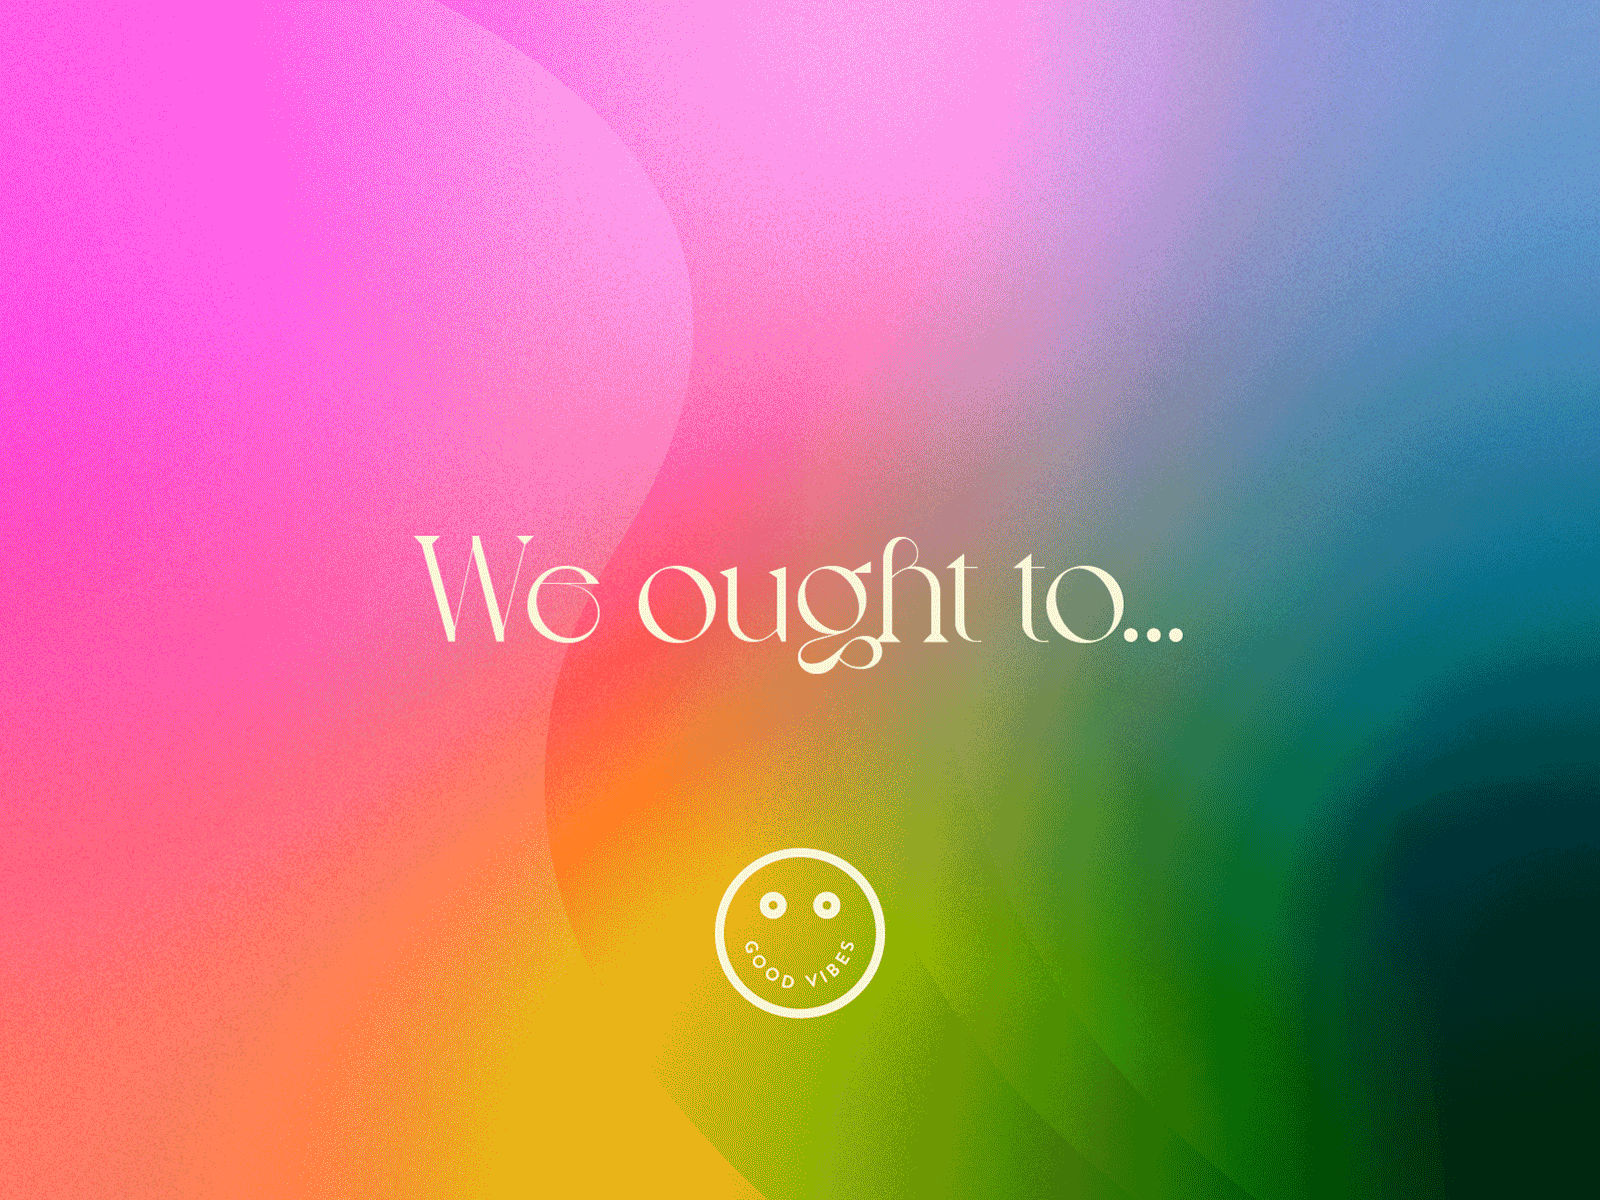 We ought to... design feel good graphicdesign positivity type typography